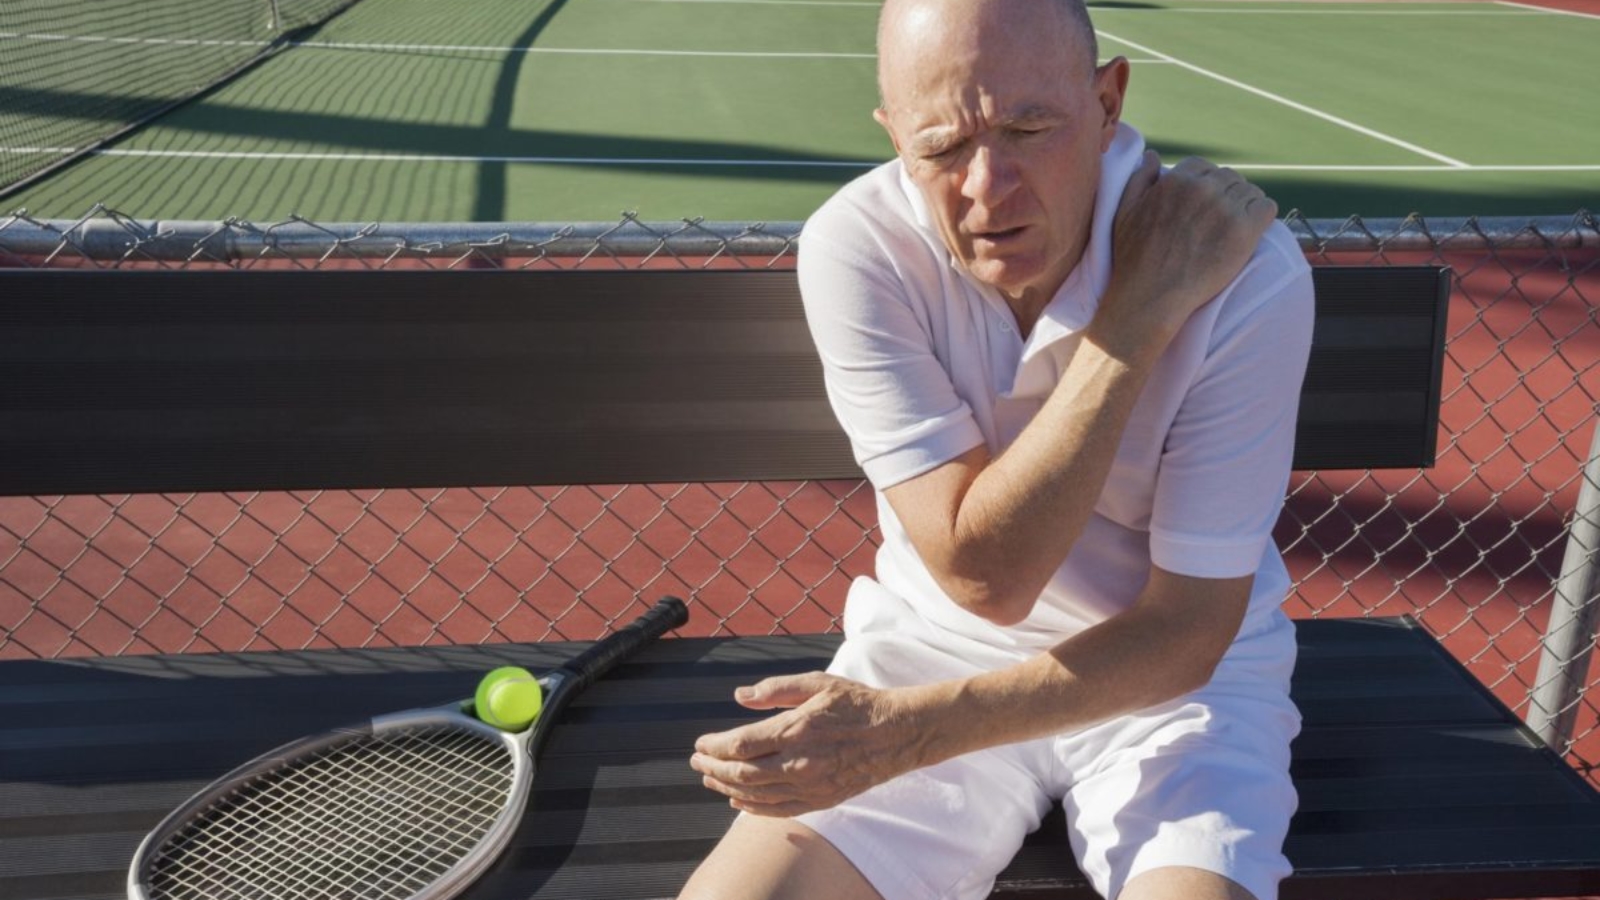 Senior male tennis player with shoulder pain sitting on bench at court